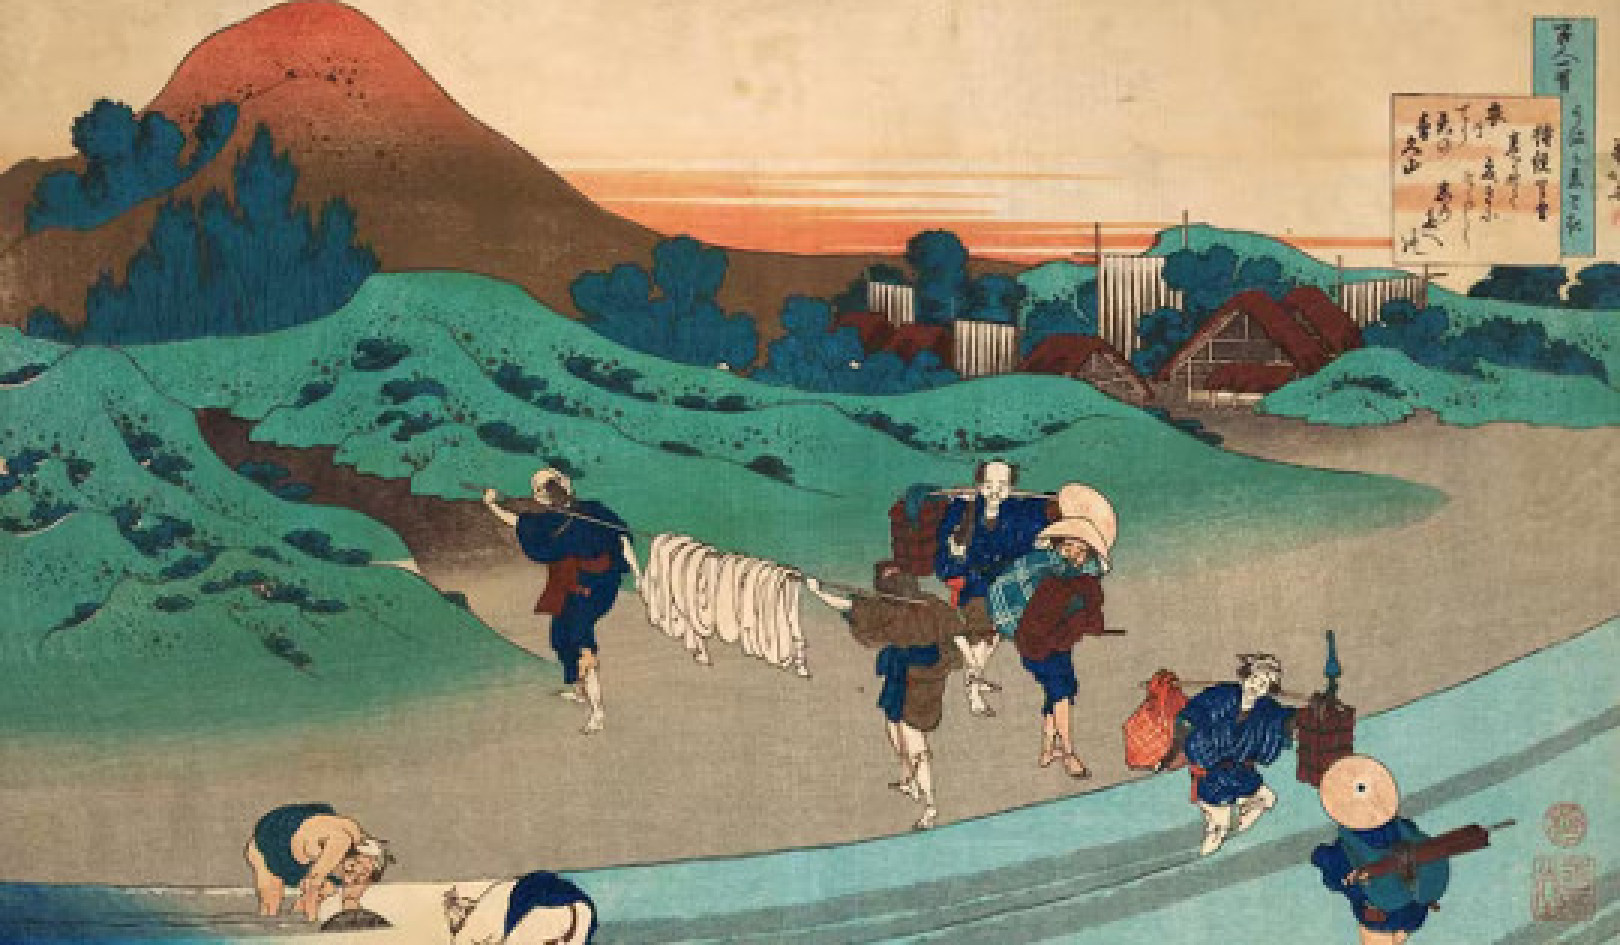 How Centuries of Self-Isolation Turned Japan into a Sustainable Society